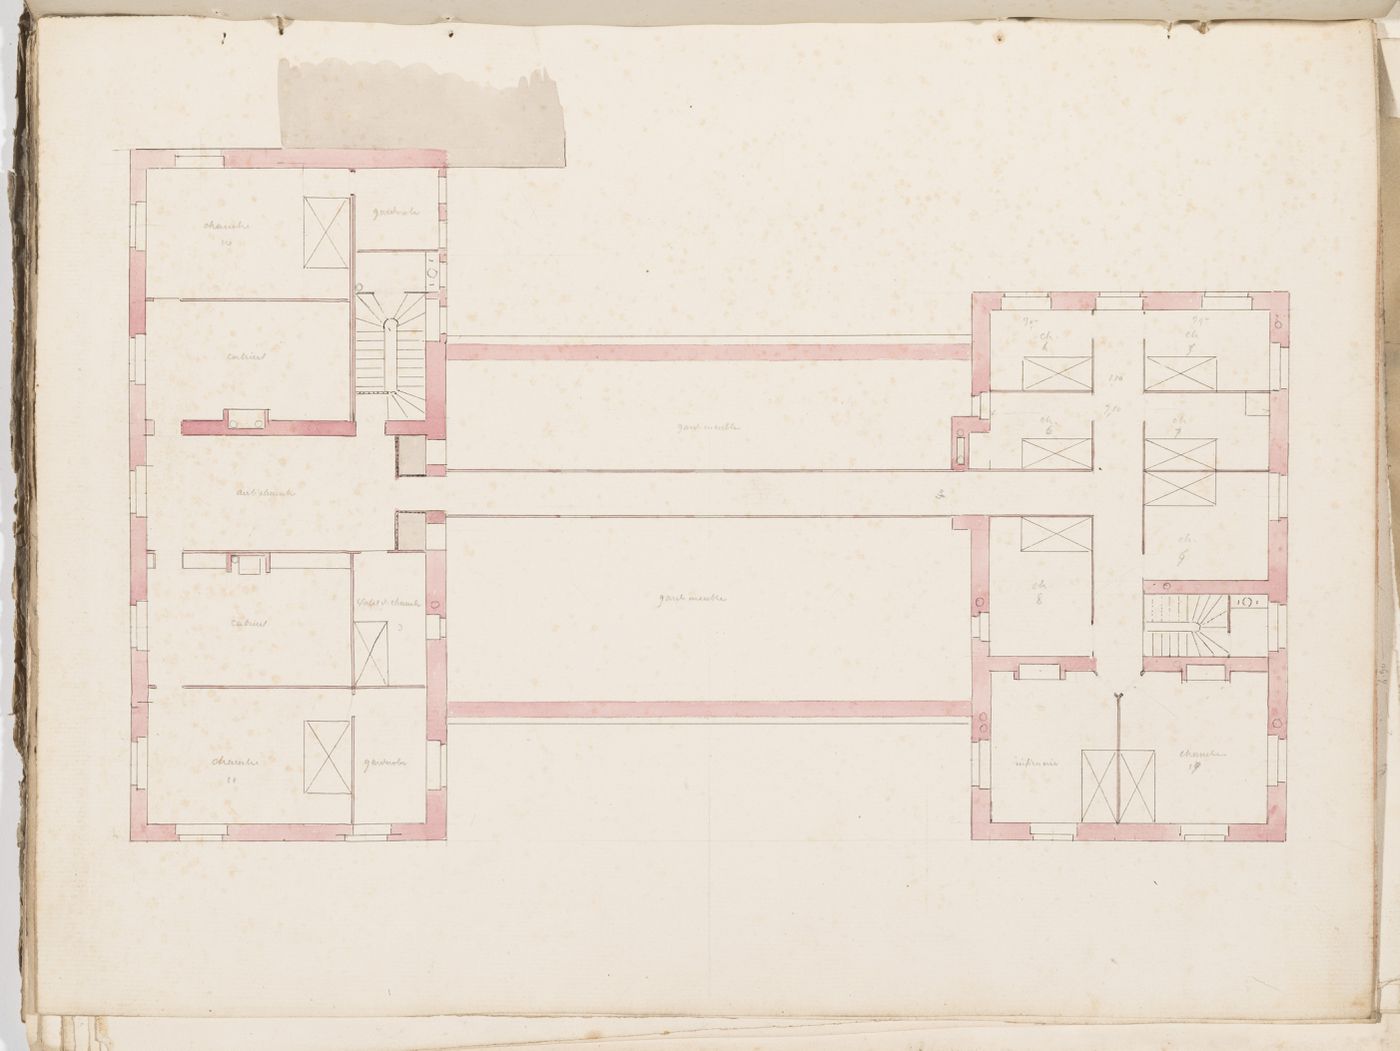 Project no. 7 for a country house for comte Treilhard: Second floor plan